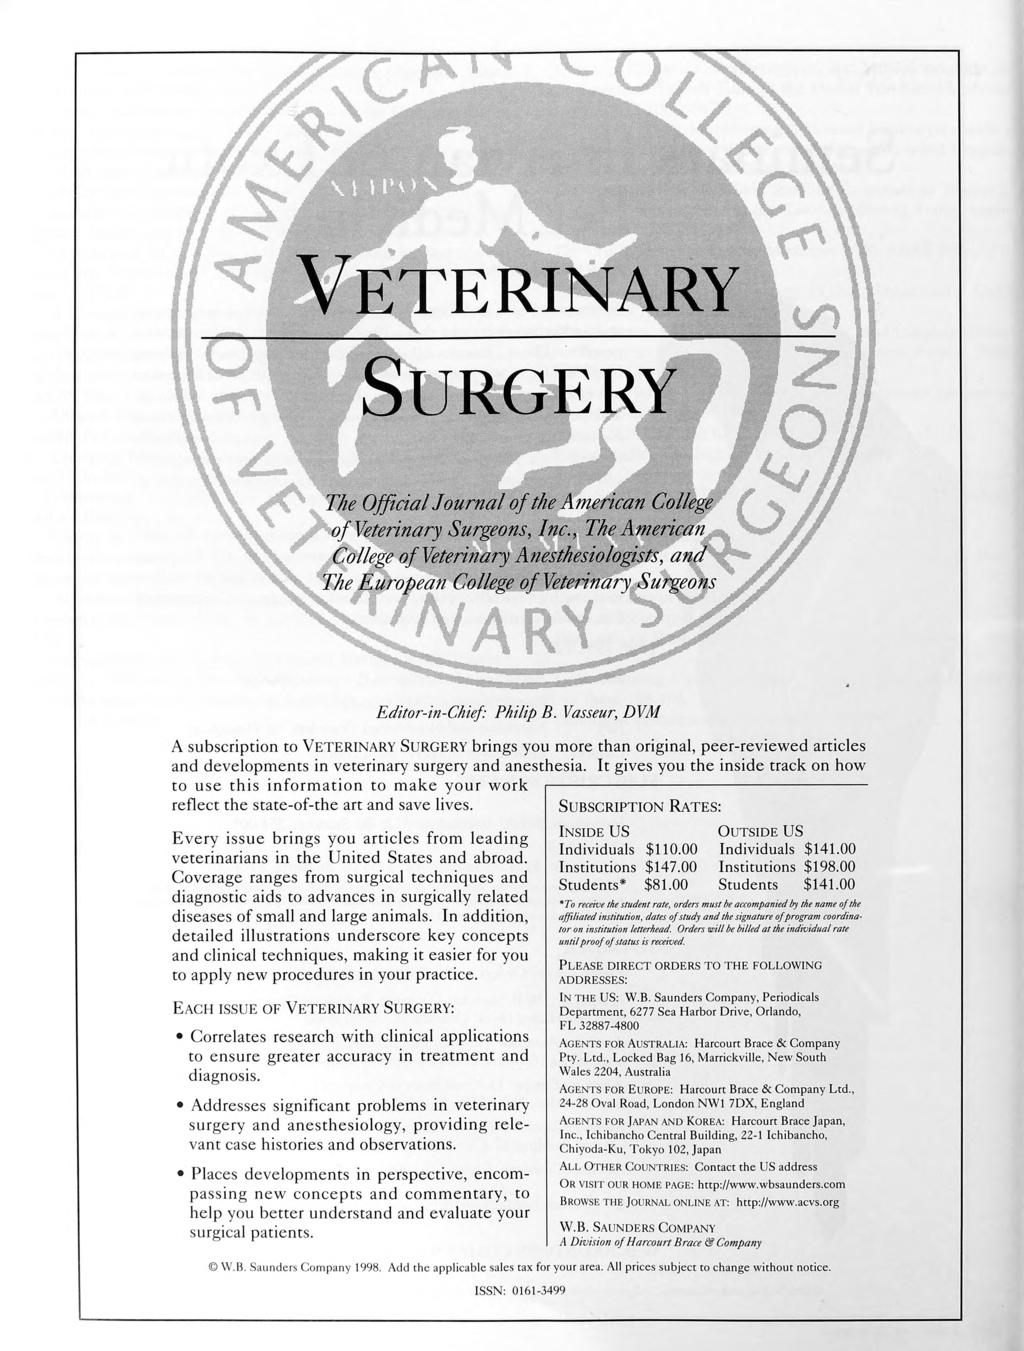 e r i n X rj m I The Official Journal of the A mat: ( o %>[ Veterinary Sur^t n>h. hn., ih< \uitn fiffalegjf^of Yeterinary Anesthesiologists, c *Khe Mdjtopeari College of Veterinaryfiich.